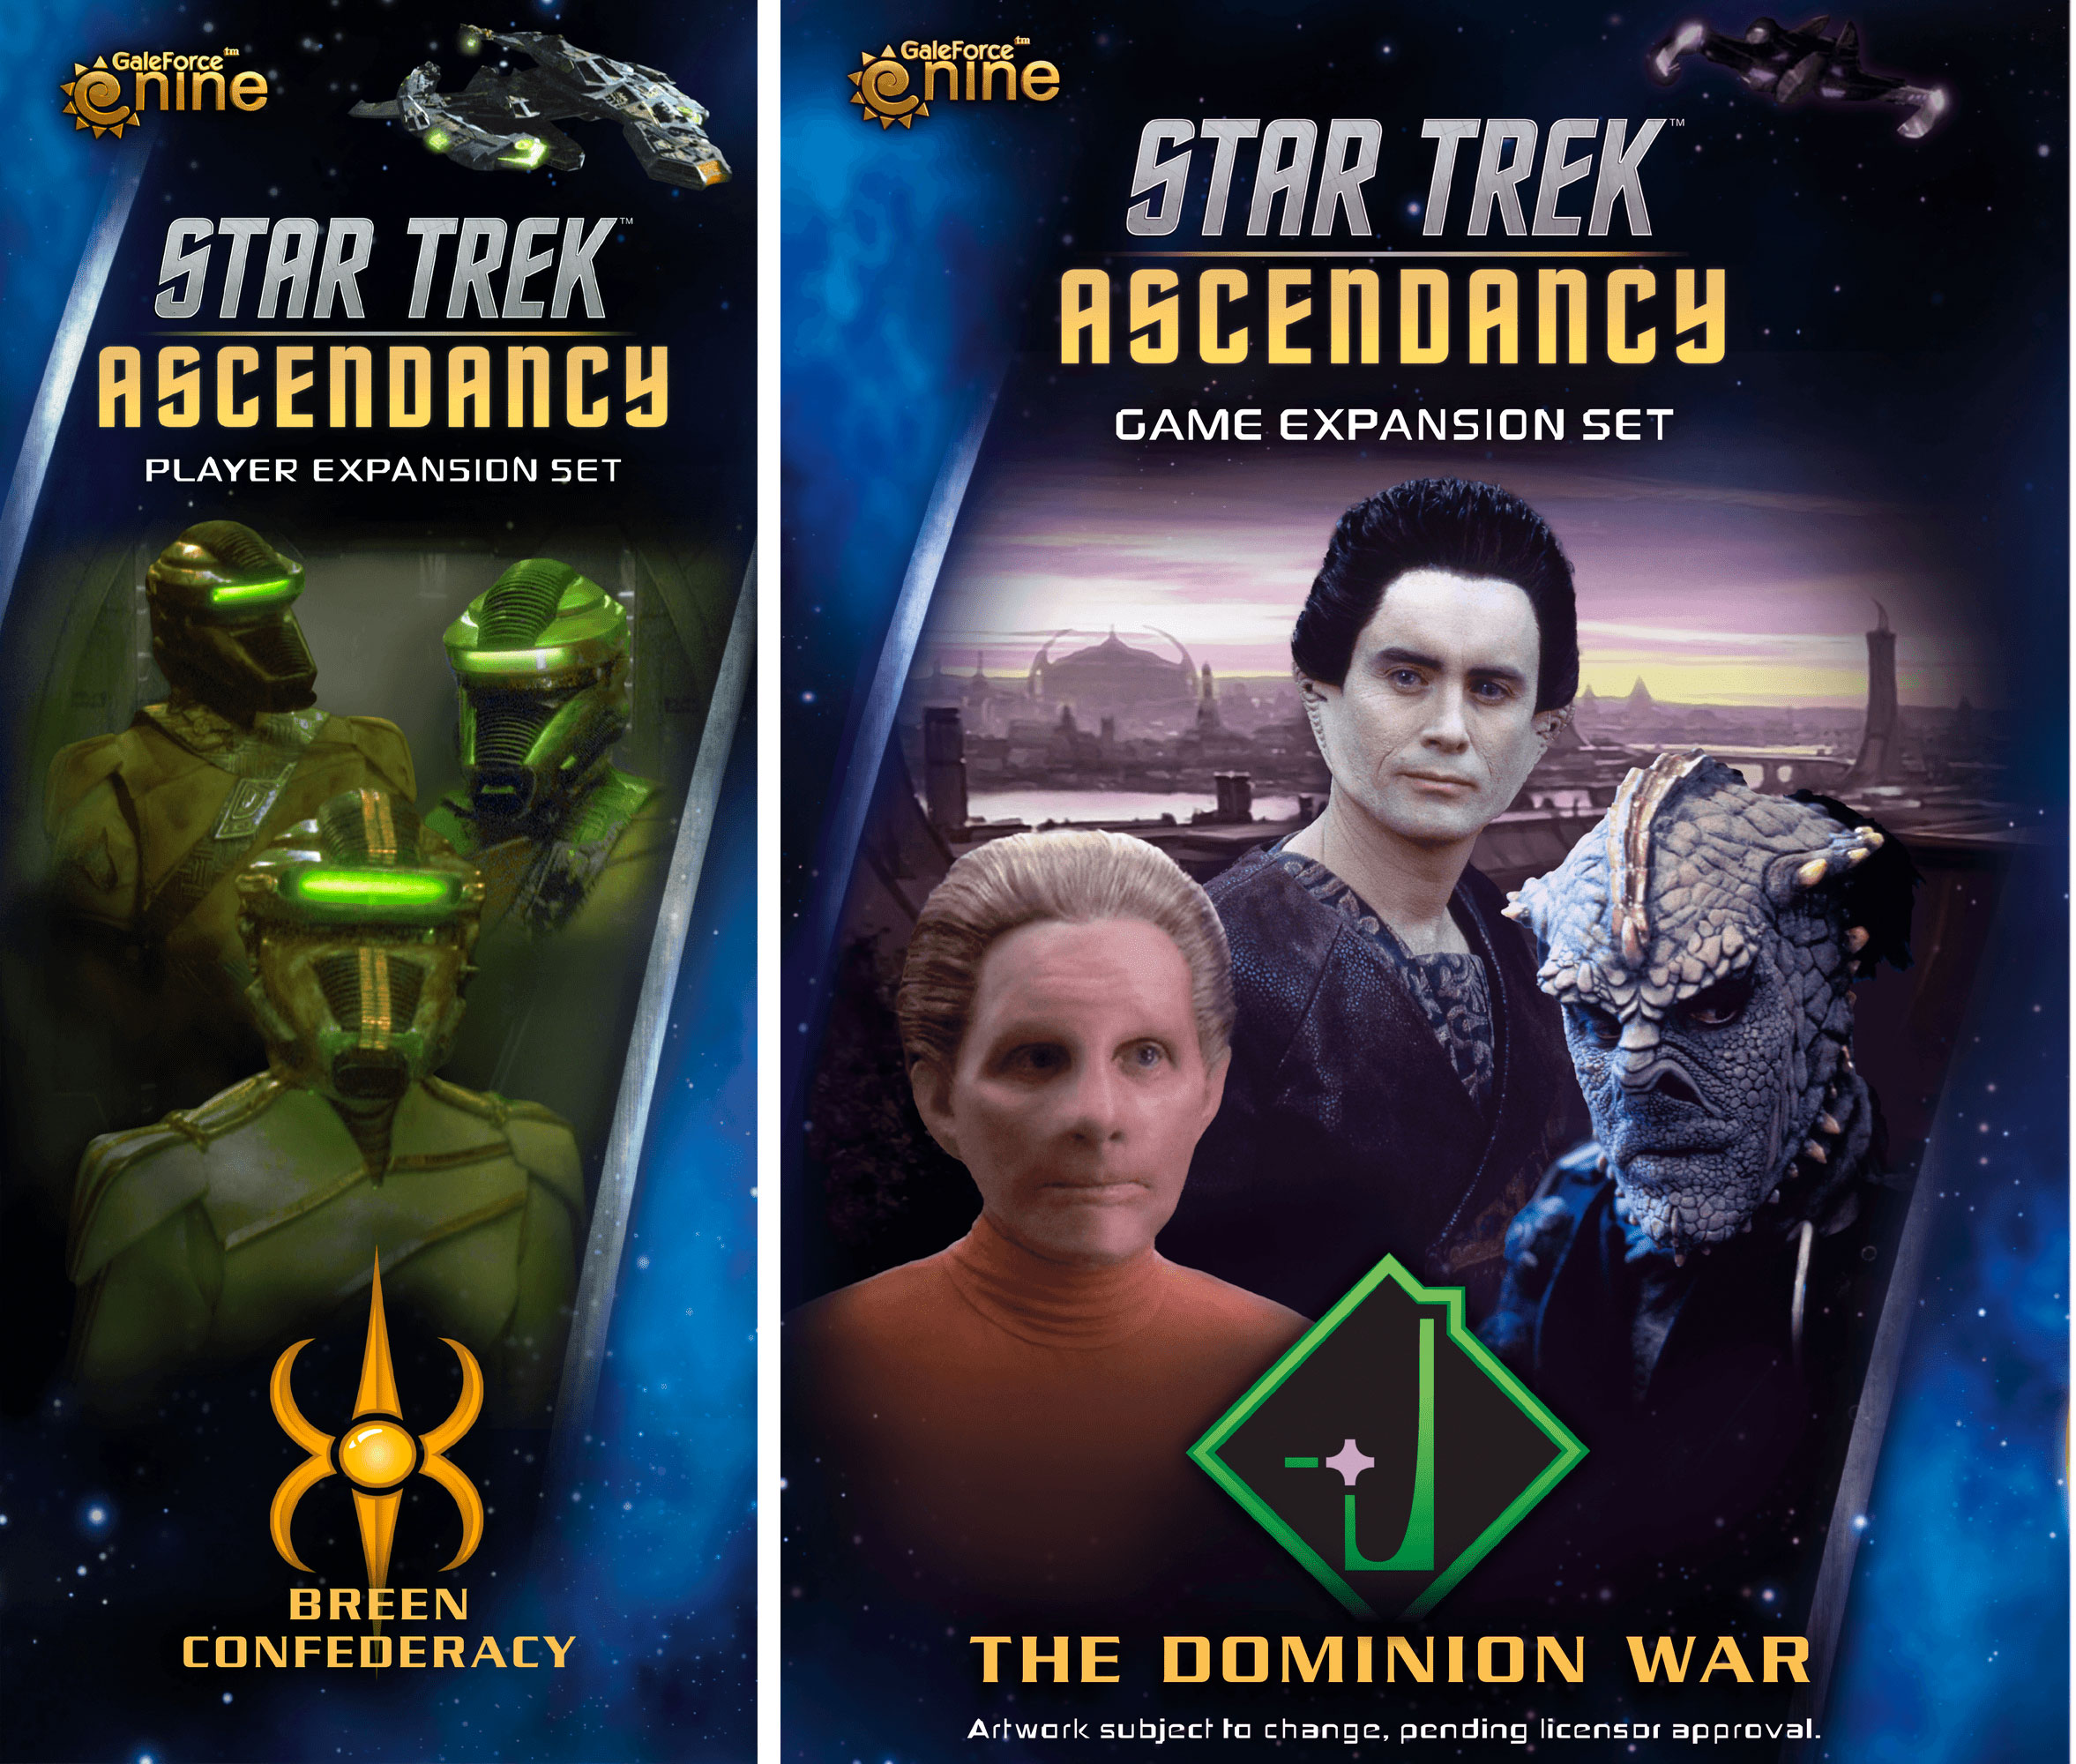 Star Trek: Ascendancy Breen Confederacy and Dominion War
Expansions Review